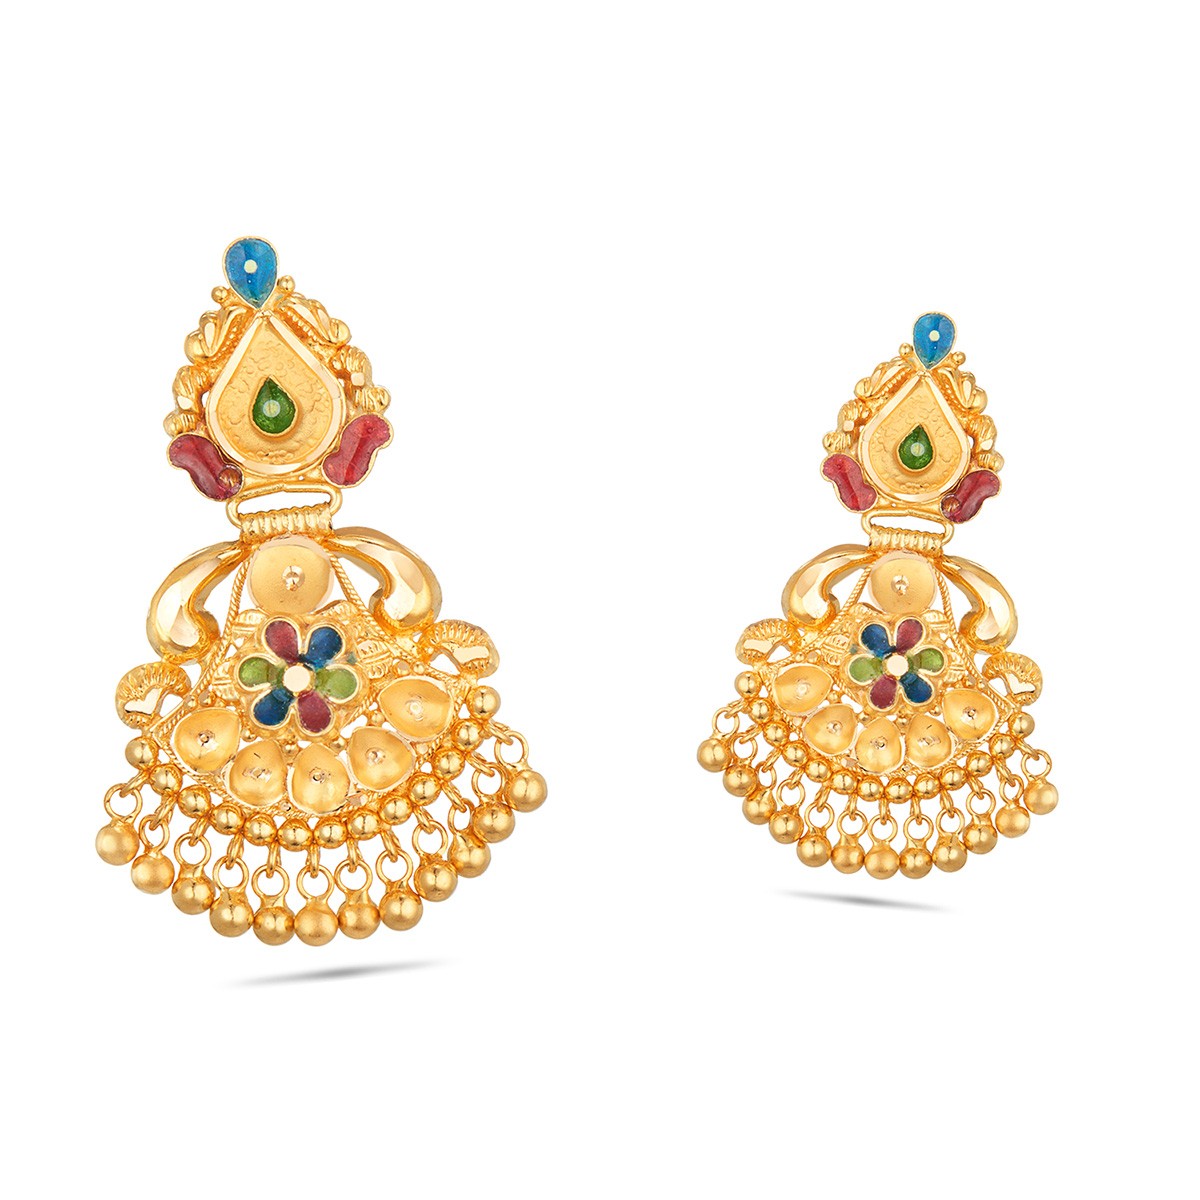 Partywear Gold Earrings at Best Price in Chennai Tamil Nadu  Sun SmithS